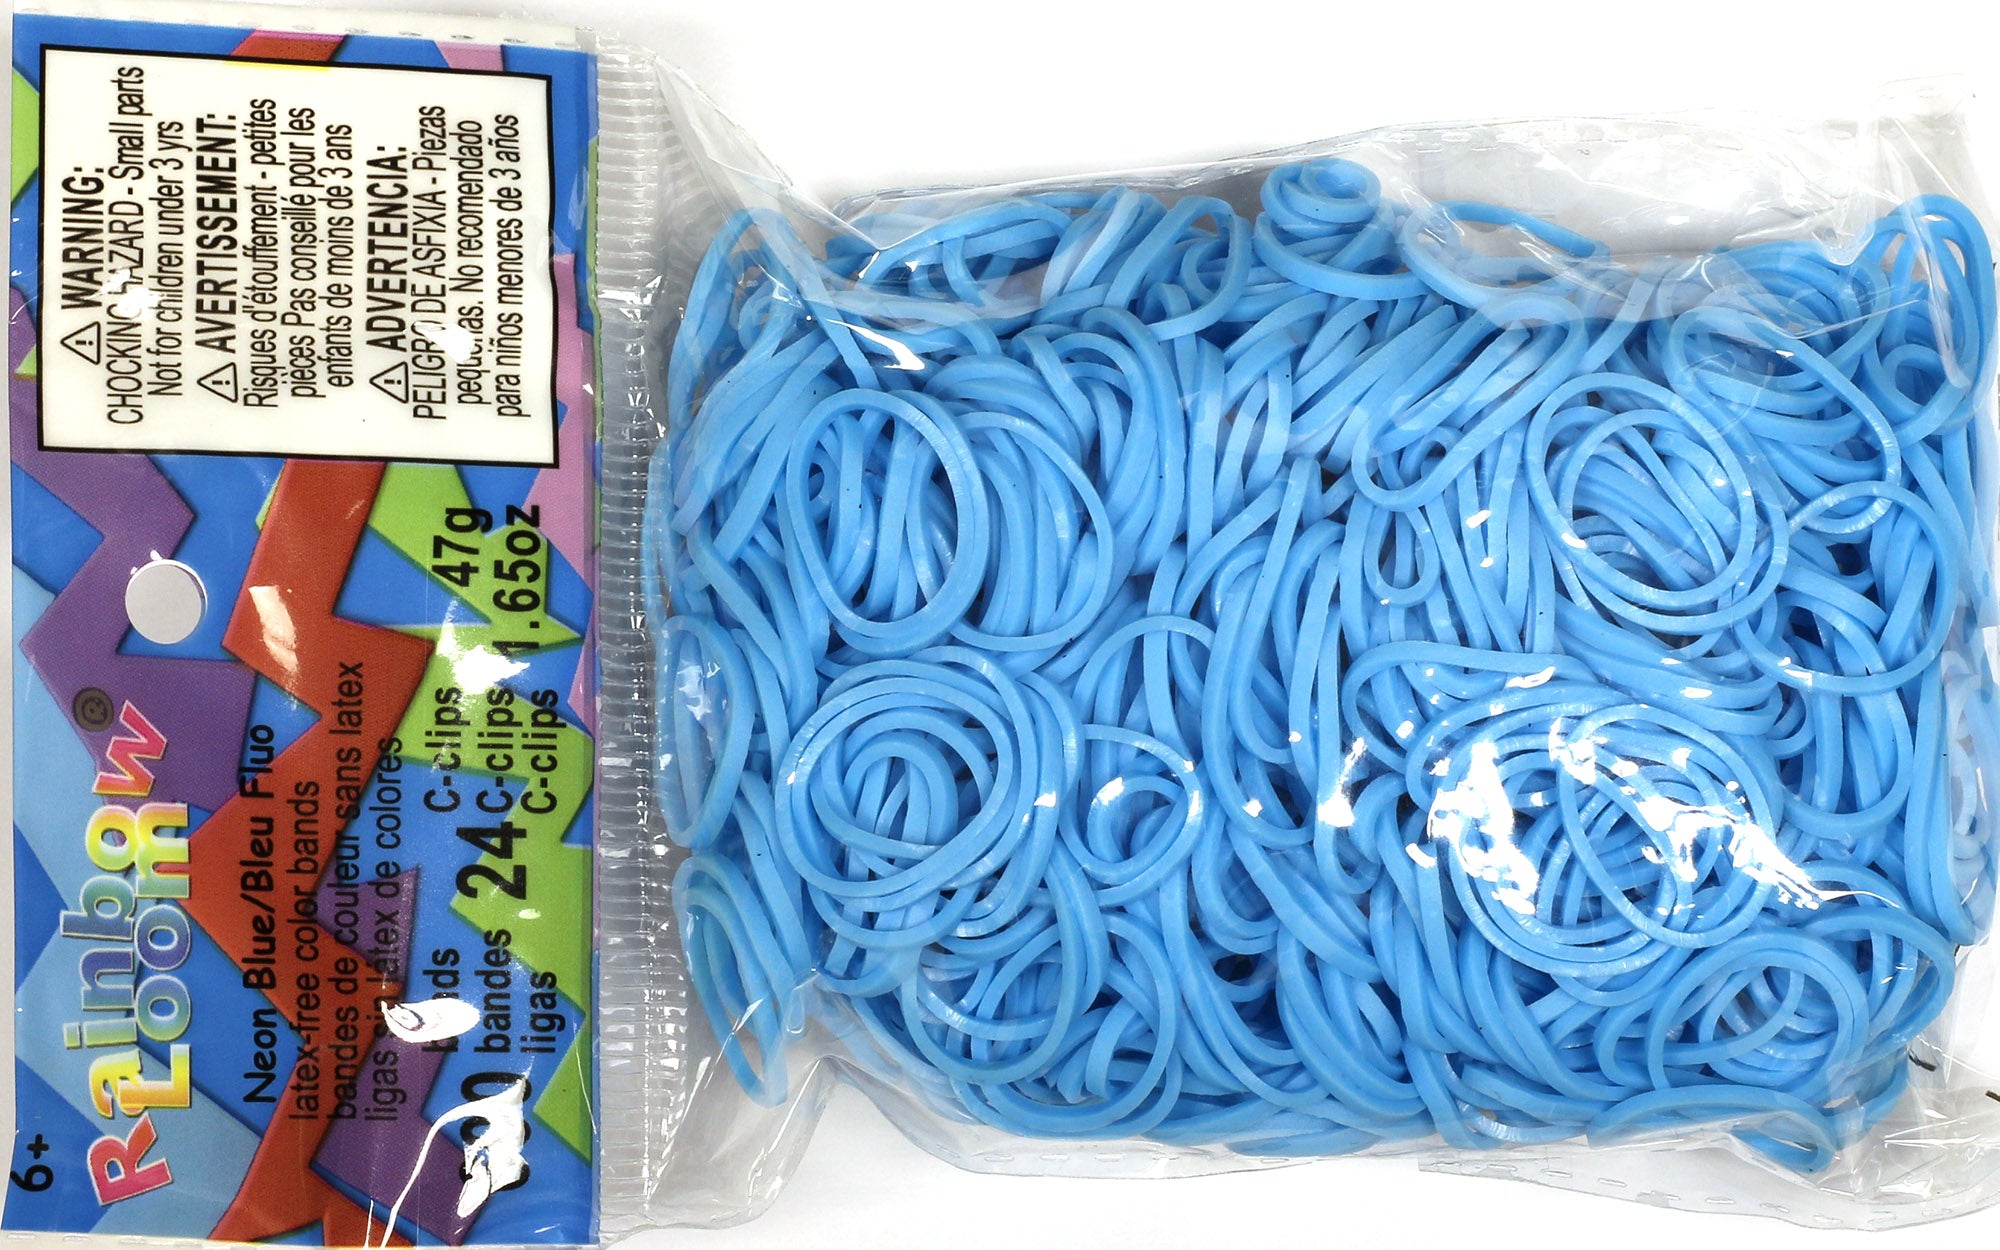 Rainbow Loom® Authentic Rubber Bands, Ocean Blue and Pink Set of